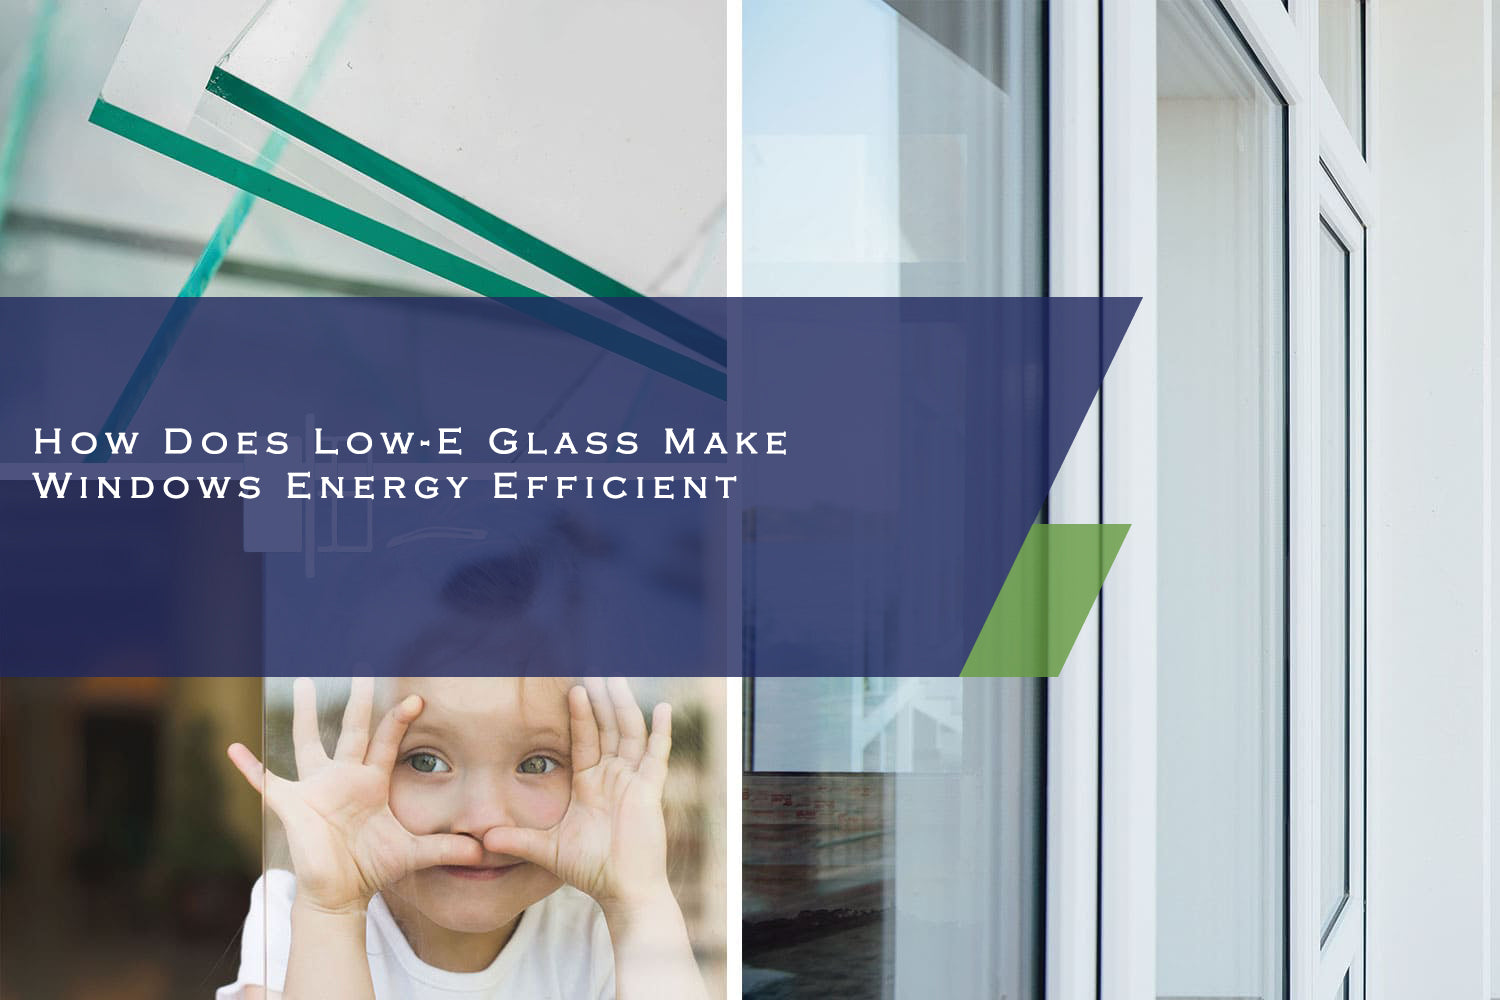 How Does Low-E Glass Make Windows Energy Efficient?